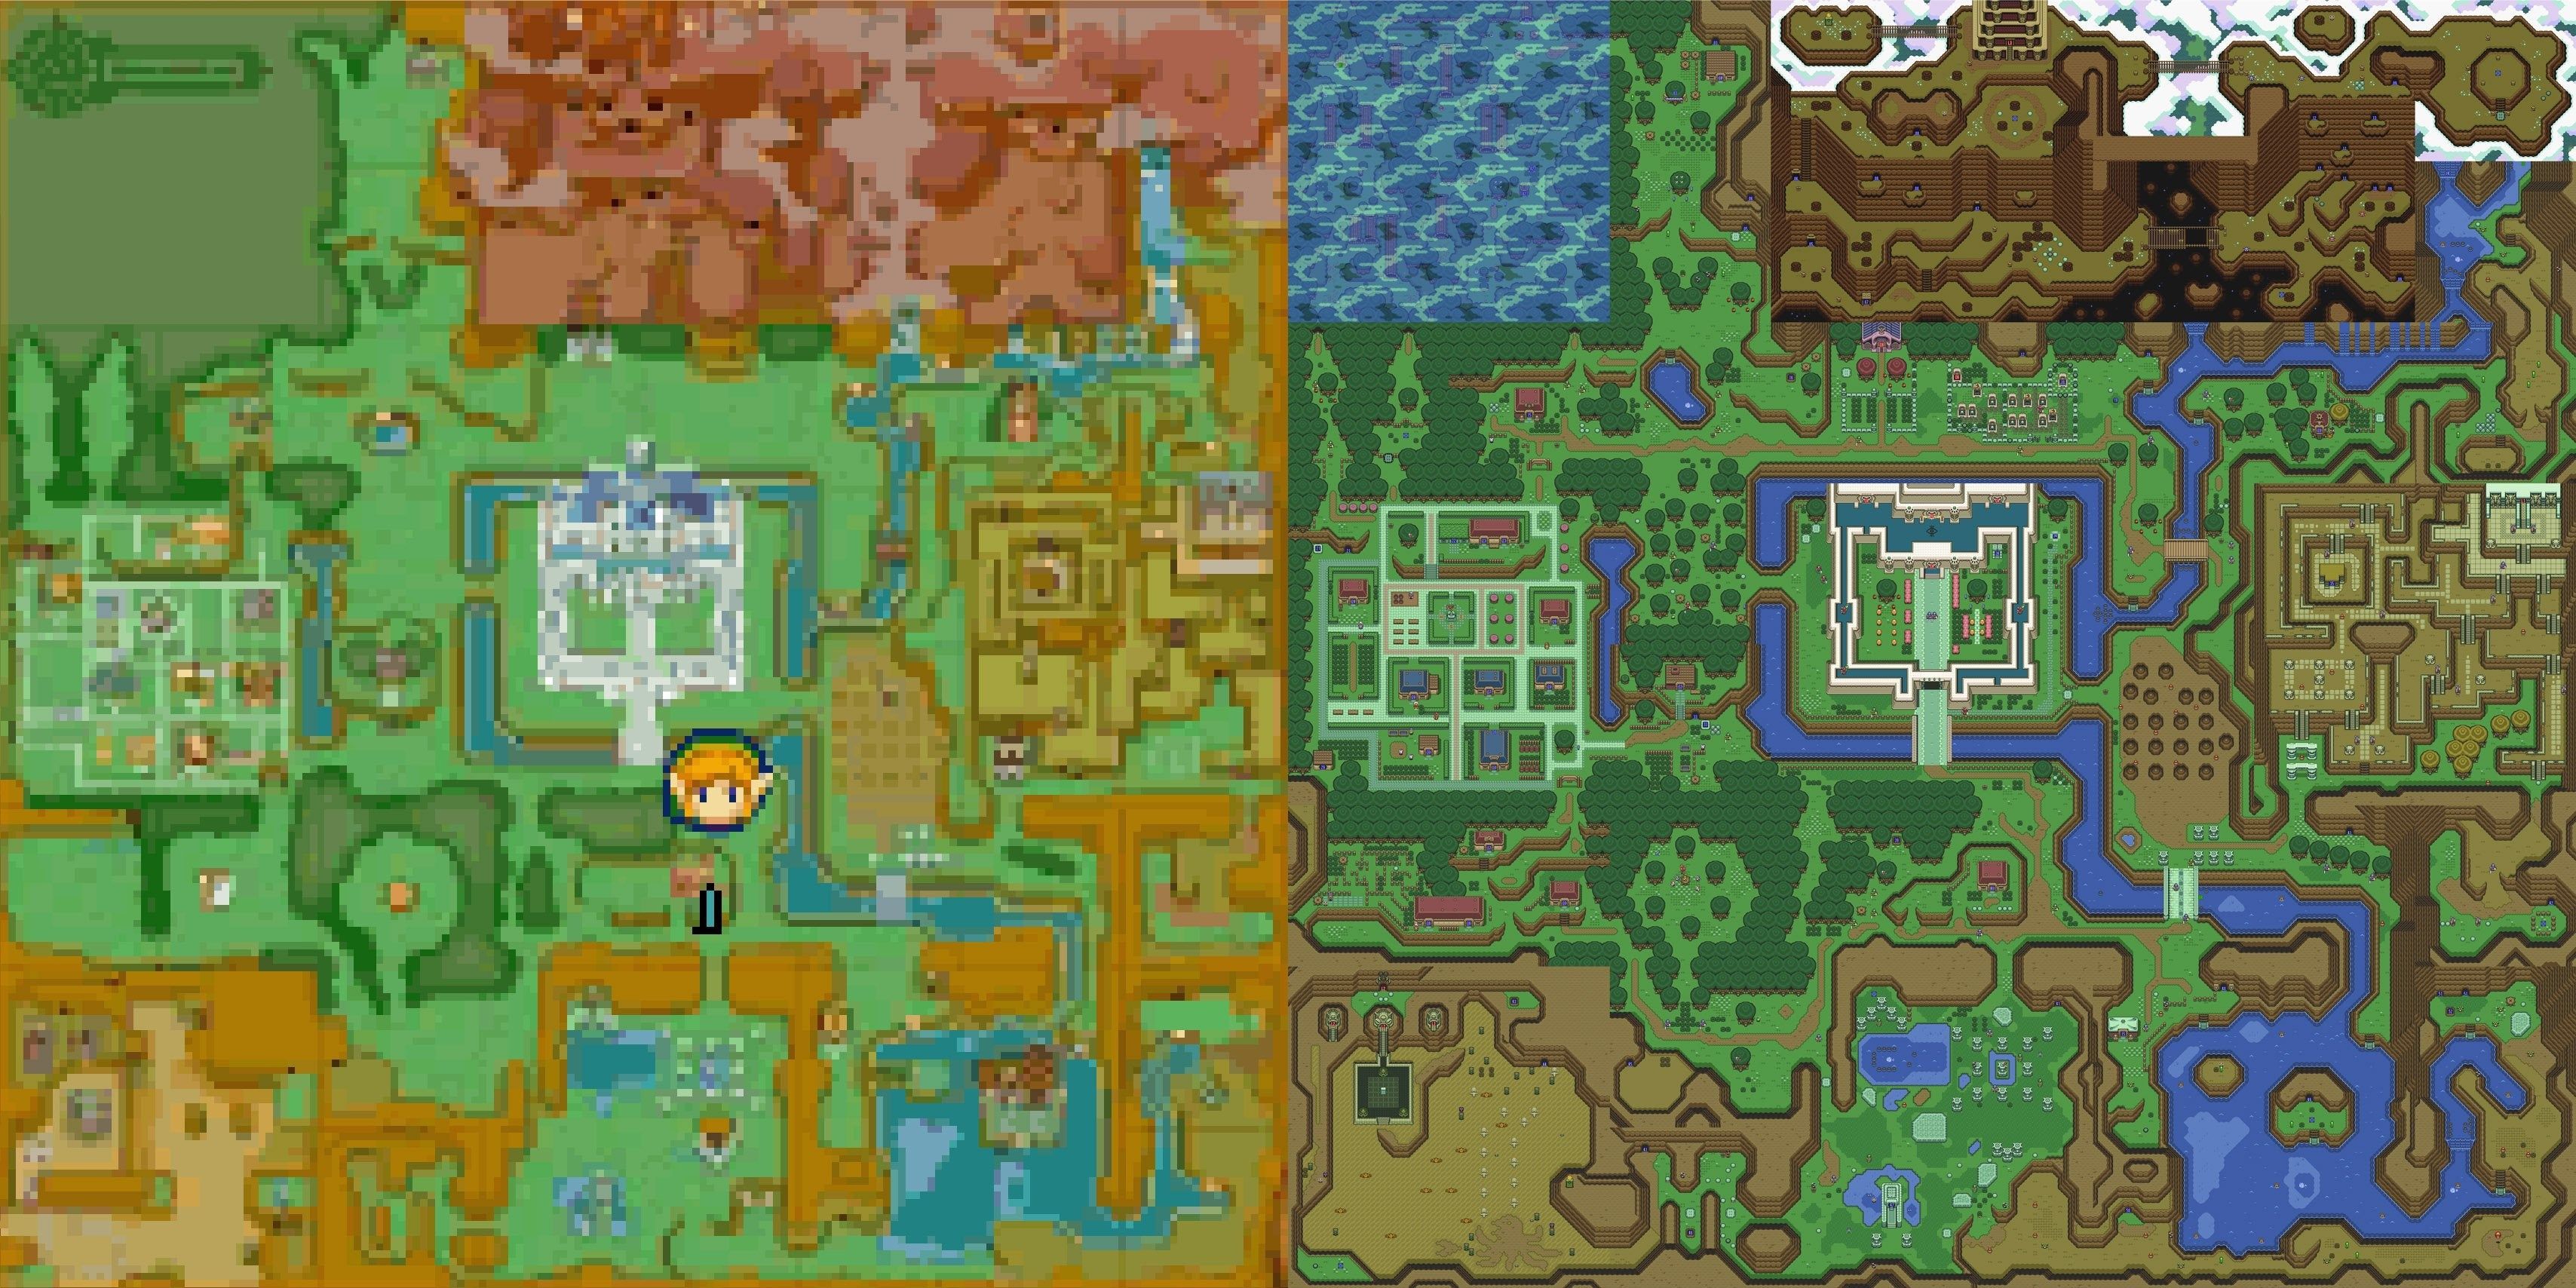 The world maps of A Link Between Worlds and A Link To The Past joined together side by side